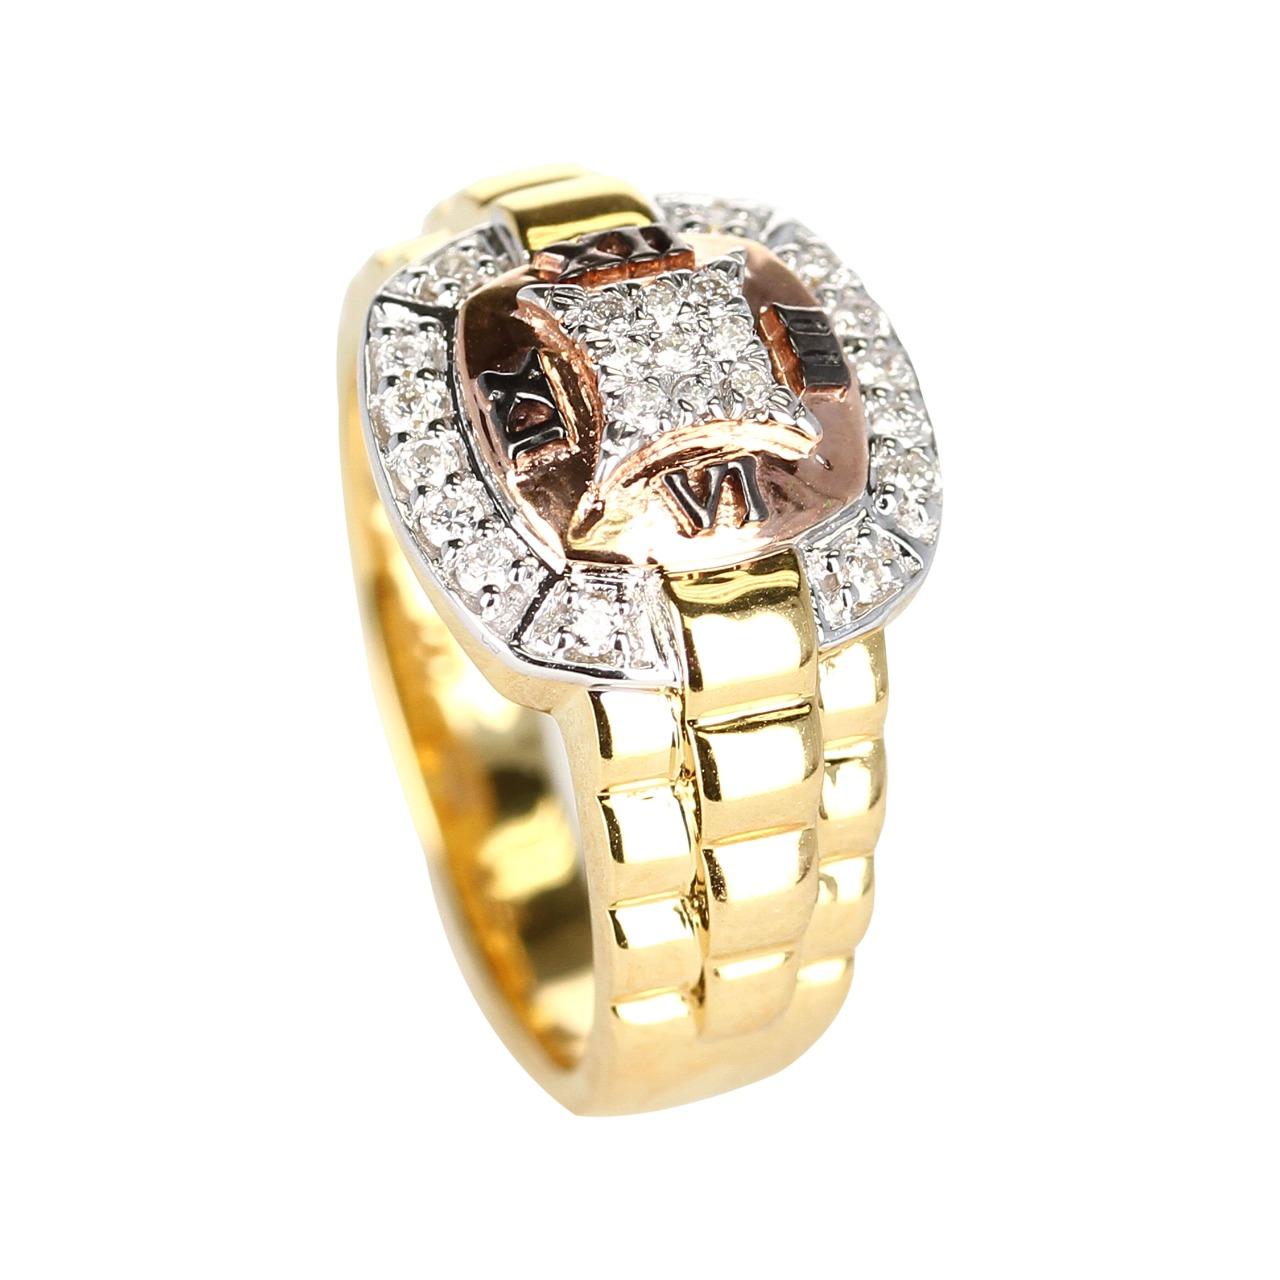 A bold Watch Band Style Ring with Diamonds and the Roman Numerals: XII, III, VI, IX with the center area with 0.23 carats of Diamonds. 14K Yellow and Rose Gold, Ring Size 6.25. Signed D'D for D'Deco Jewels. Metal type and stones can be customized. 

